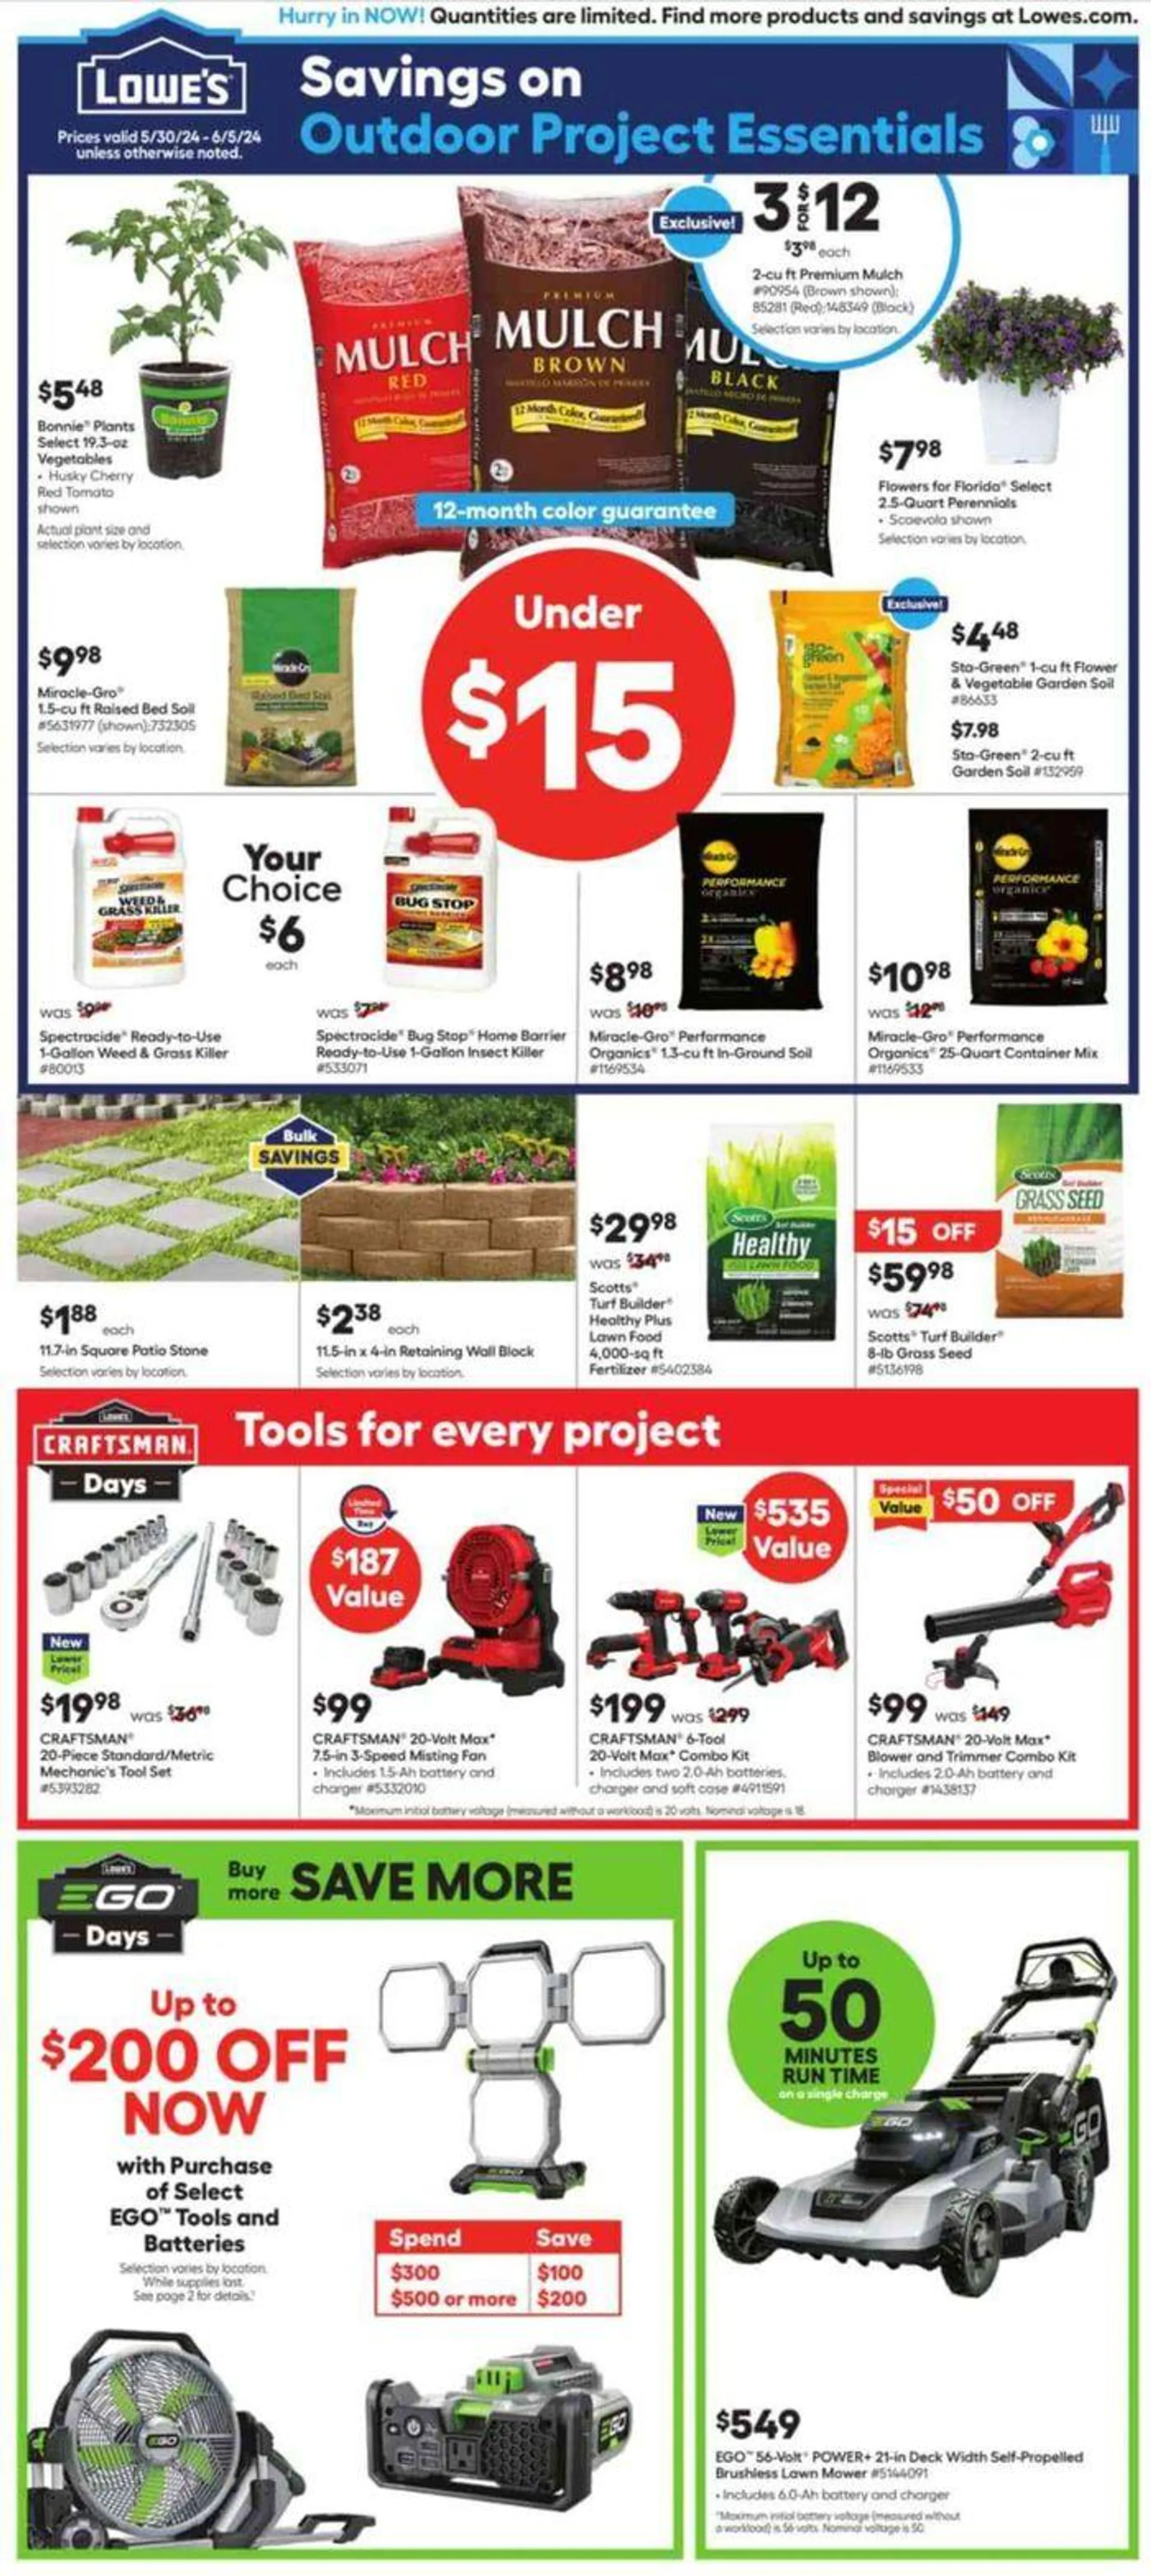 Savings On Outdoor Project Essentials - 1